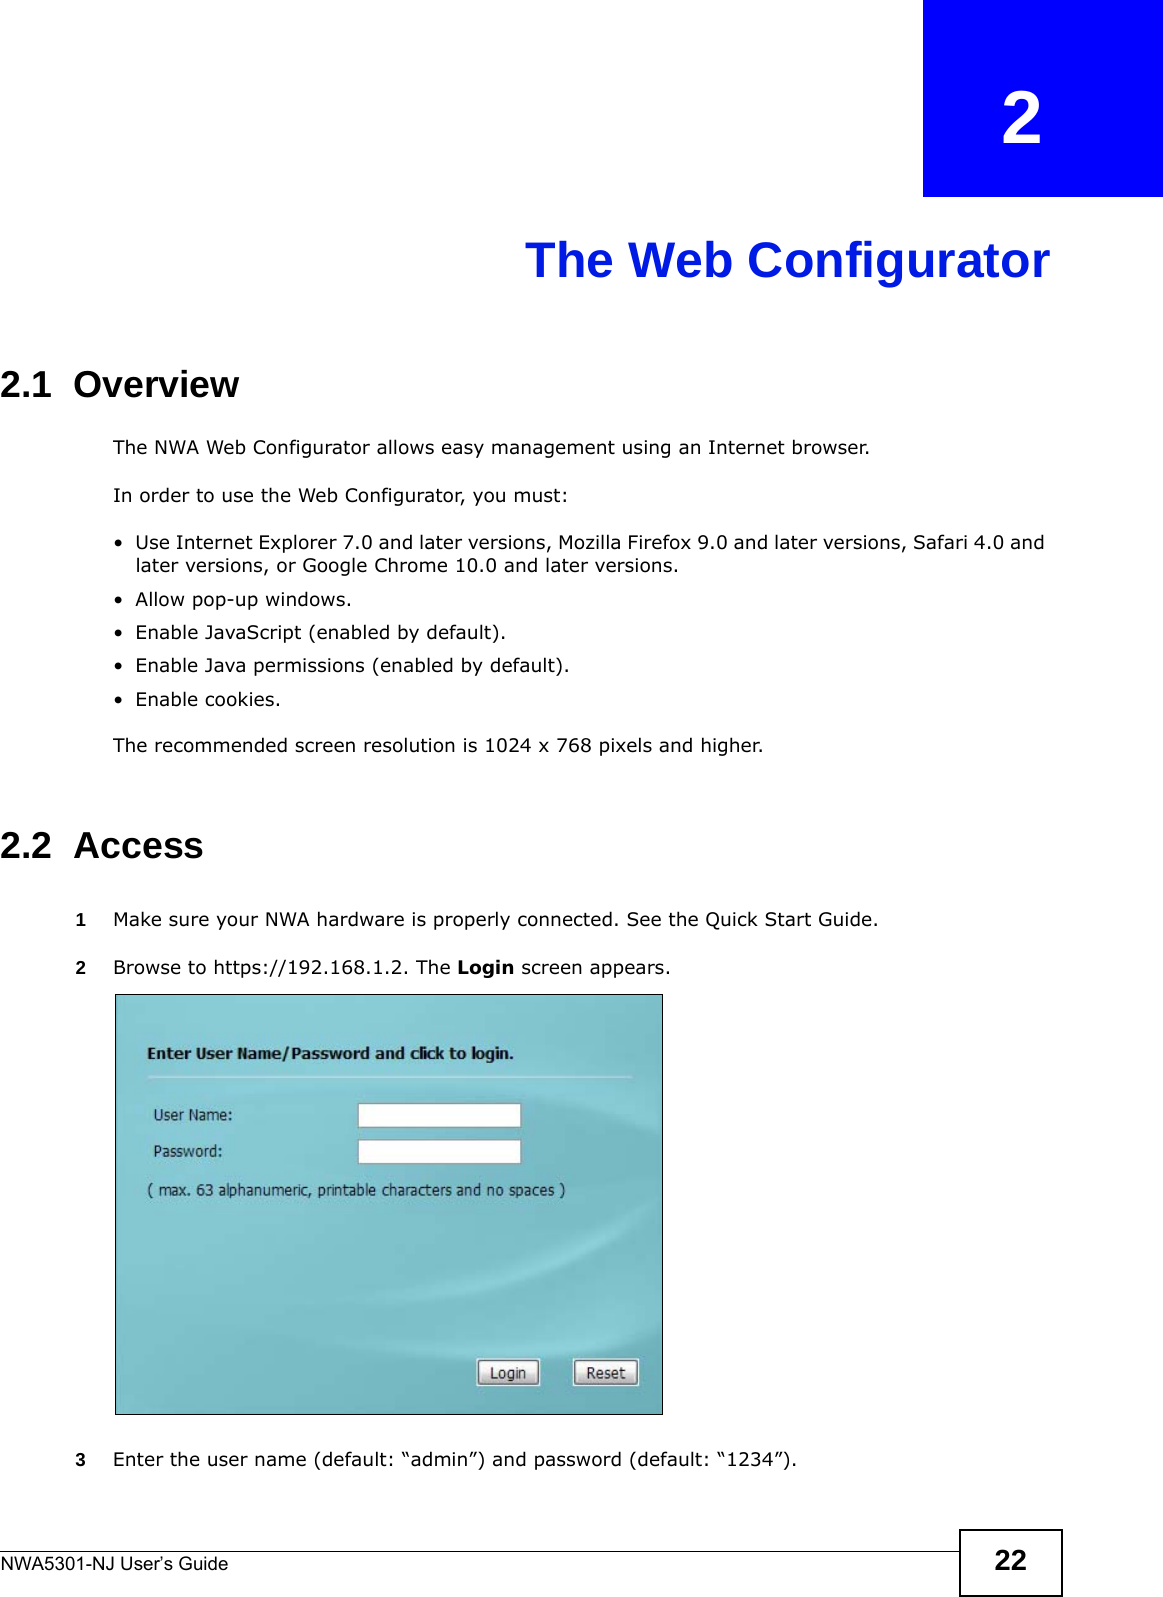 NWA5301-NJ User’s Guide 22CHAPTER   2The Web Configurator2.1  OverviewThe NWA Web Configurator allows easy management using an Internet browser. In order to use the Web Configurator, you must:• Use Internet Explorer 7.0 and later versions, Mozilla Firefox 9.0 and later versions, Safari 4.0 and later versions, or Google Chrome 10.0 and later versions.• Allow pop-up windows.• Enable JavaScript (enabled by default).• Enable Java permissions (enabled by default).• Enable cookies.The recommended screen resolution is 1024 x 768 pixels and higher.2.2  Access1Make sure your NWA hardware is properly connected. See the Quick Start Guide.2Browse to https://192.168.1.2. The Login screen appears.  3Enter the user name (default: “admin”) and password (default: “1234”).